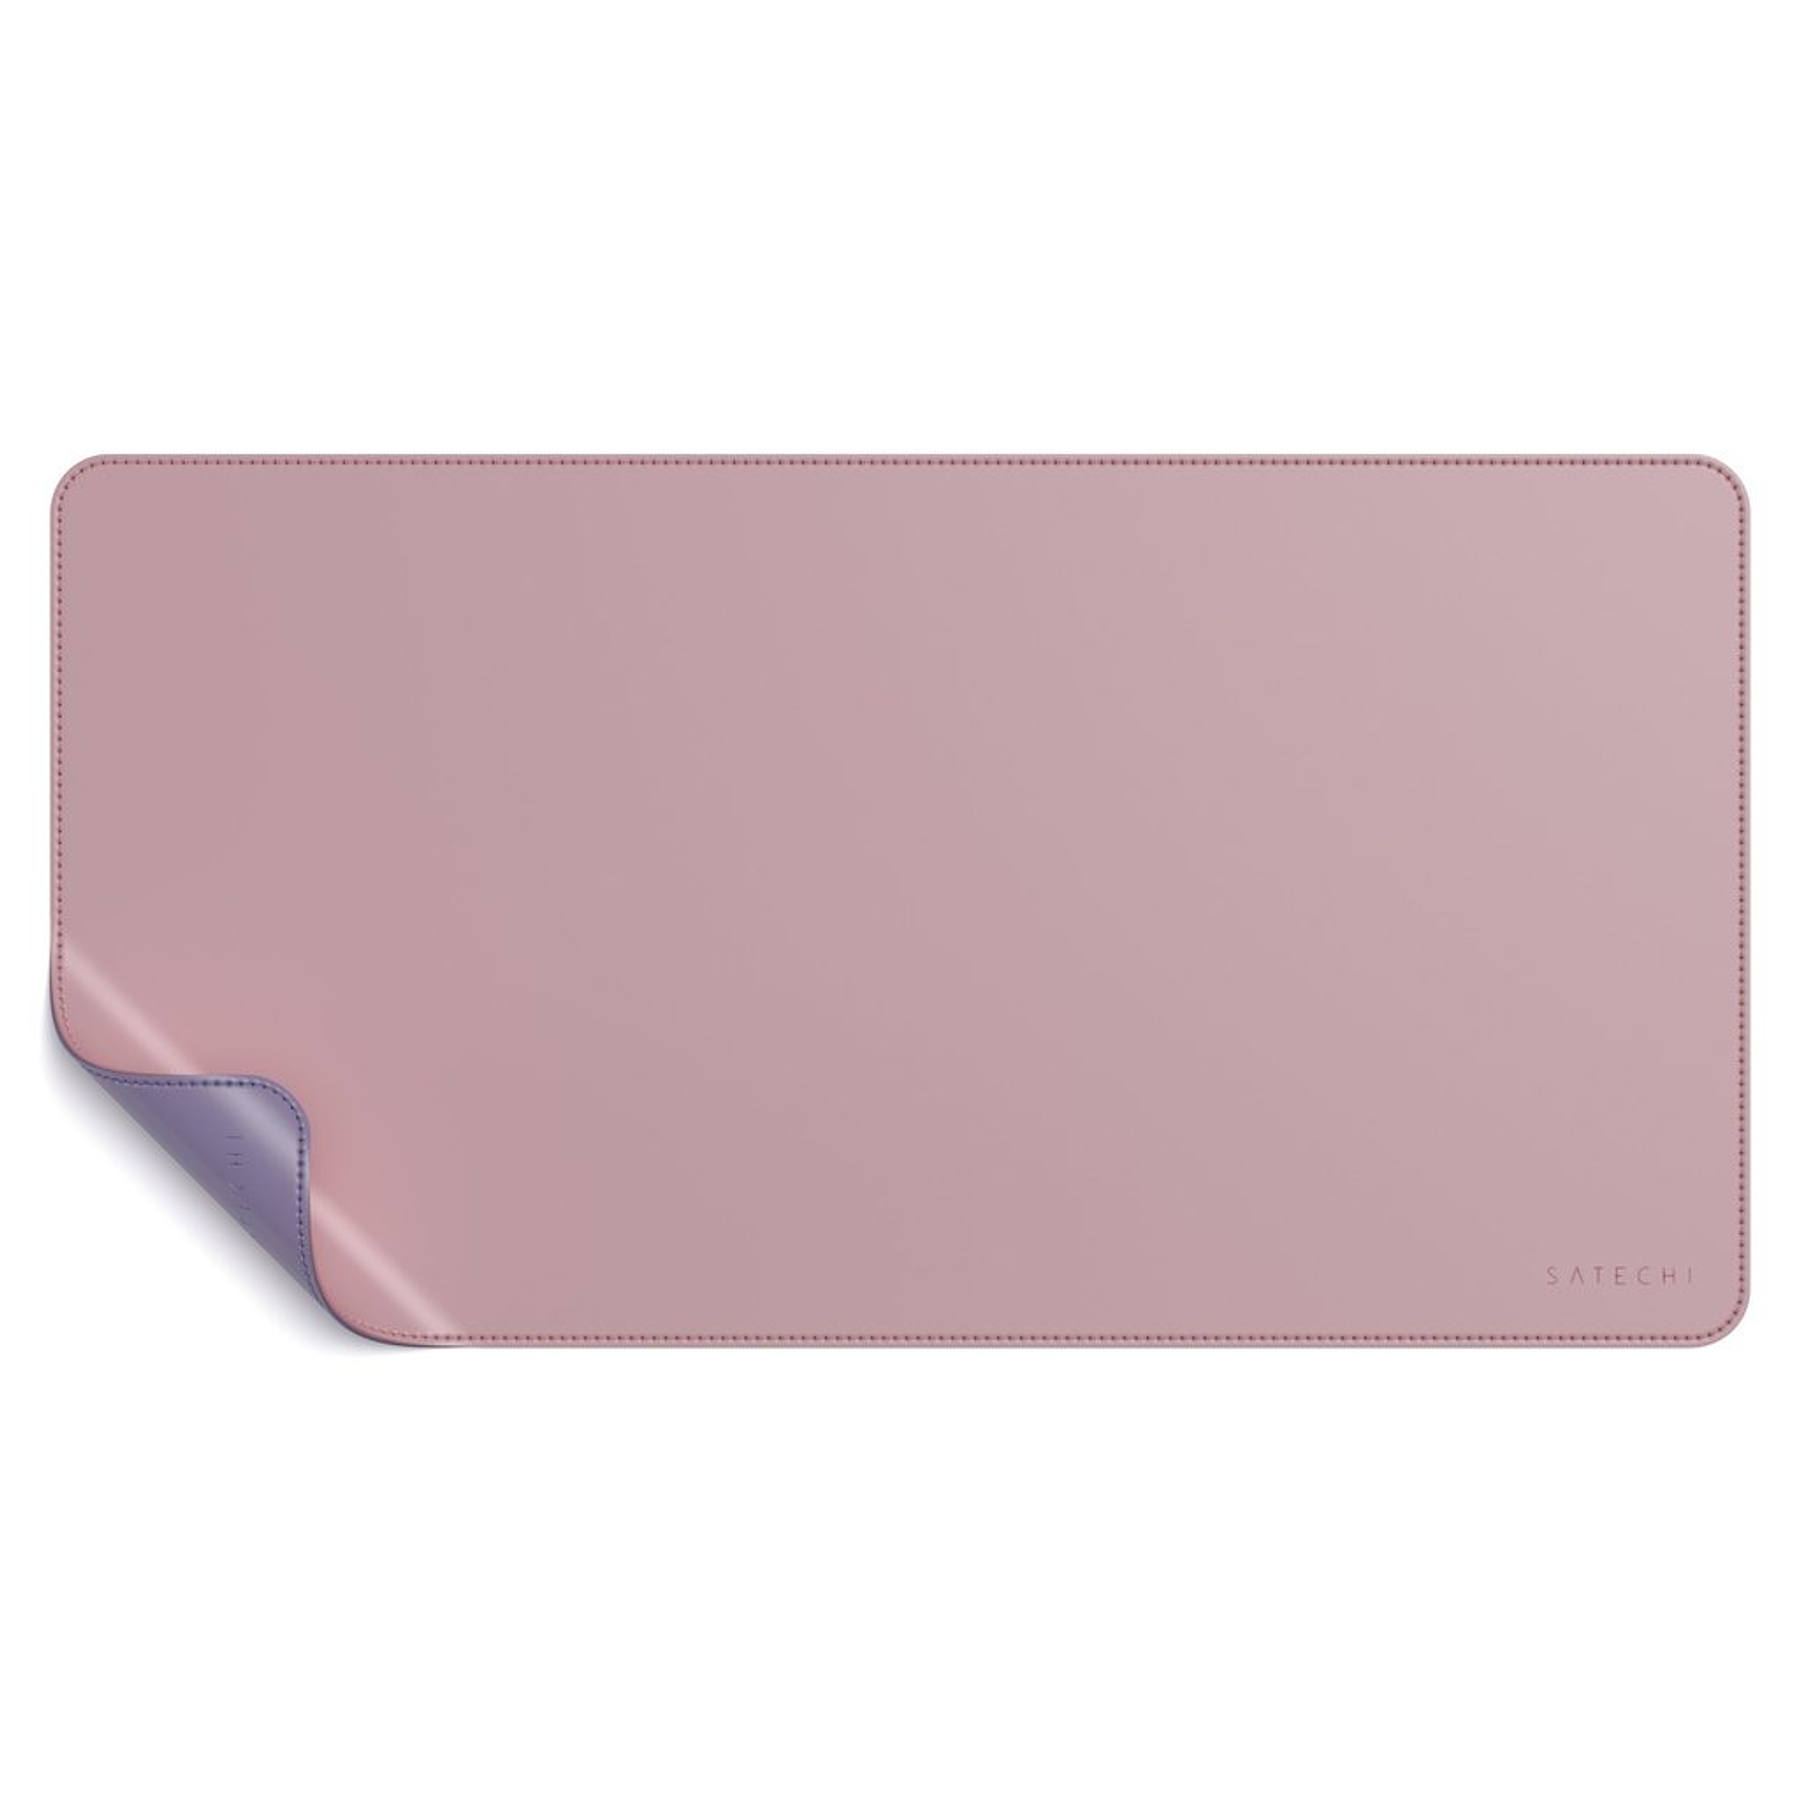 Satechi - Dual Sided Eco-Leather Deskmate (pink/purple)